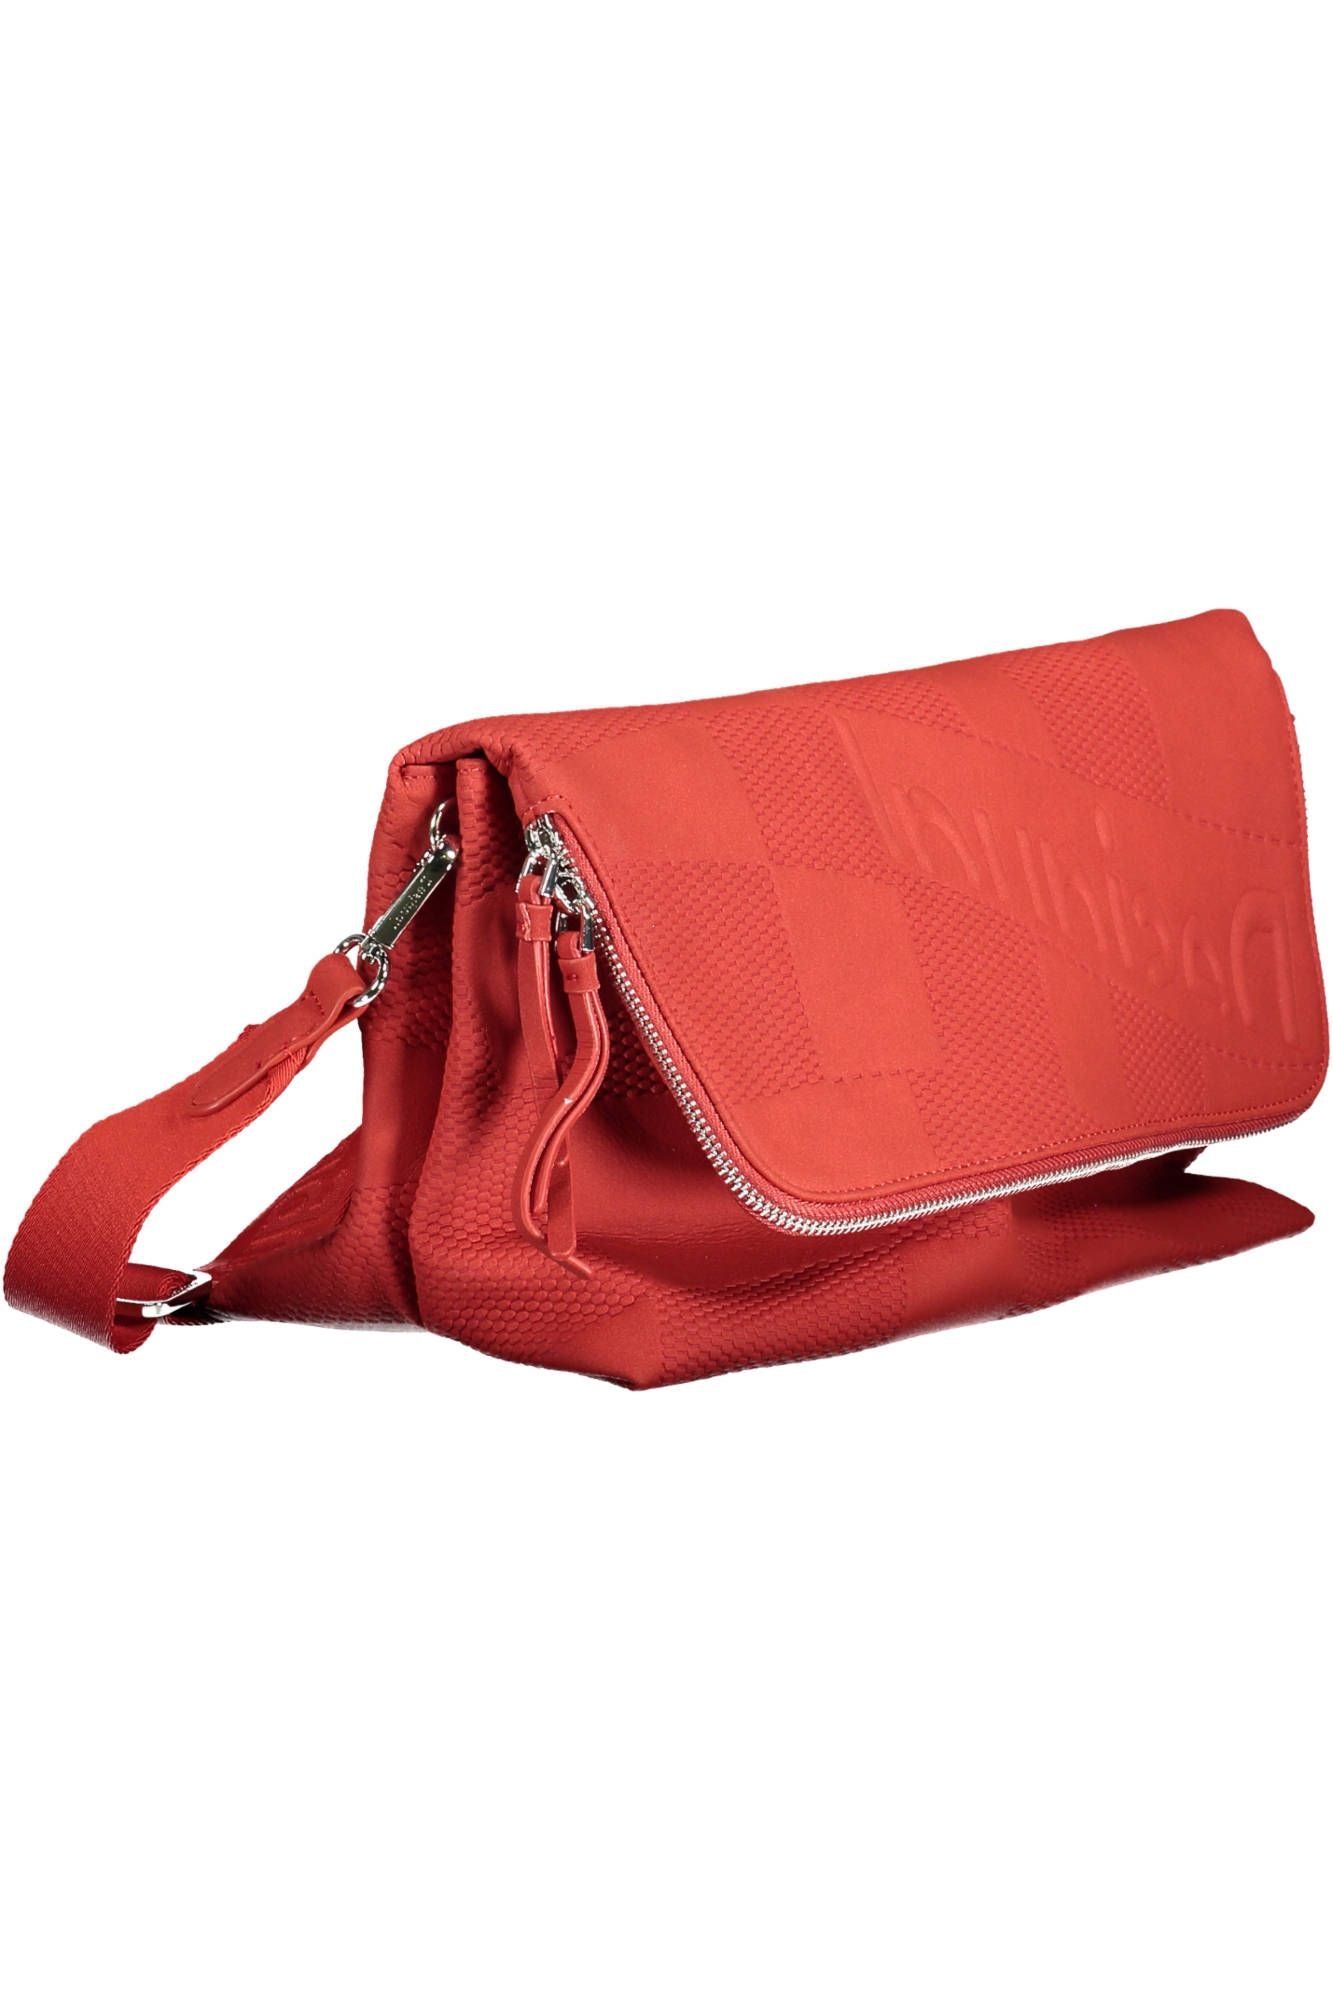 Desigual Chic Red Polyurethane Handbag with Multiple Compartments